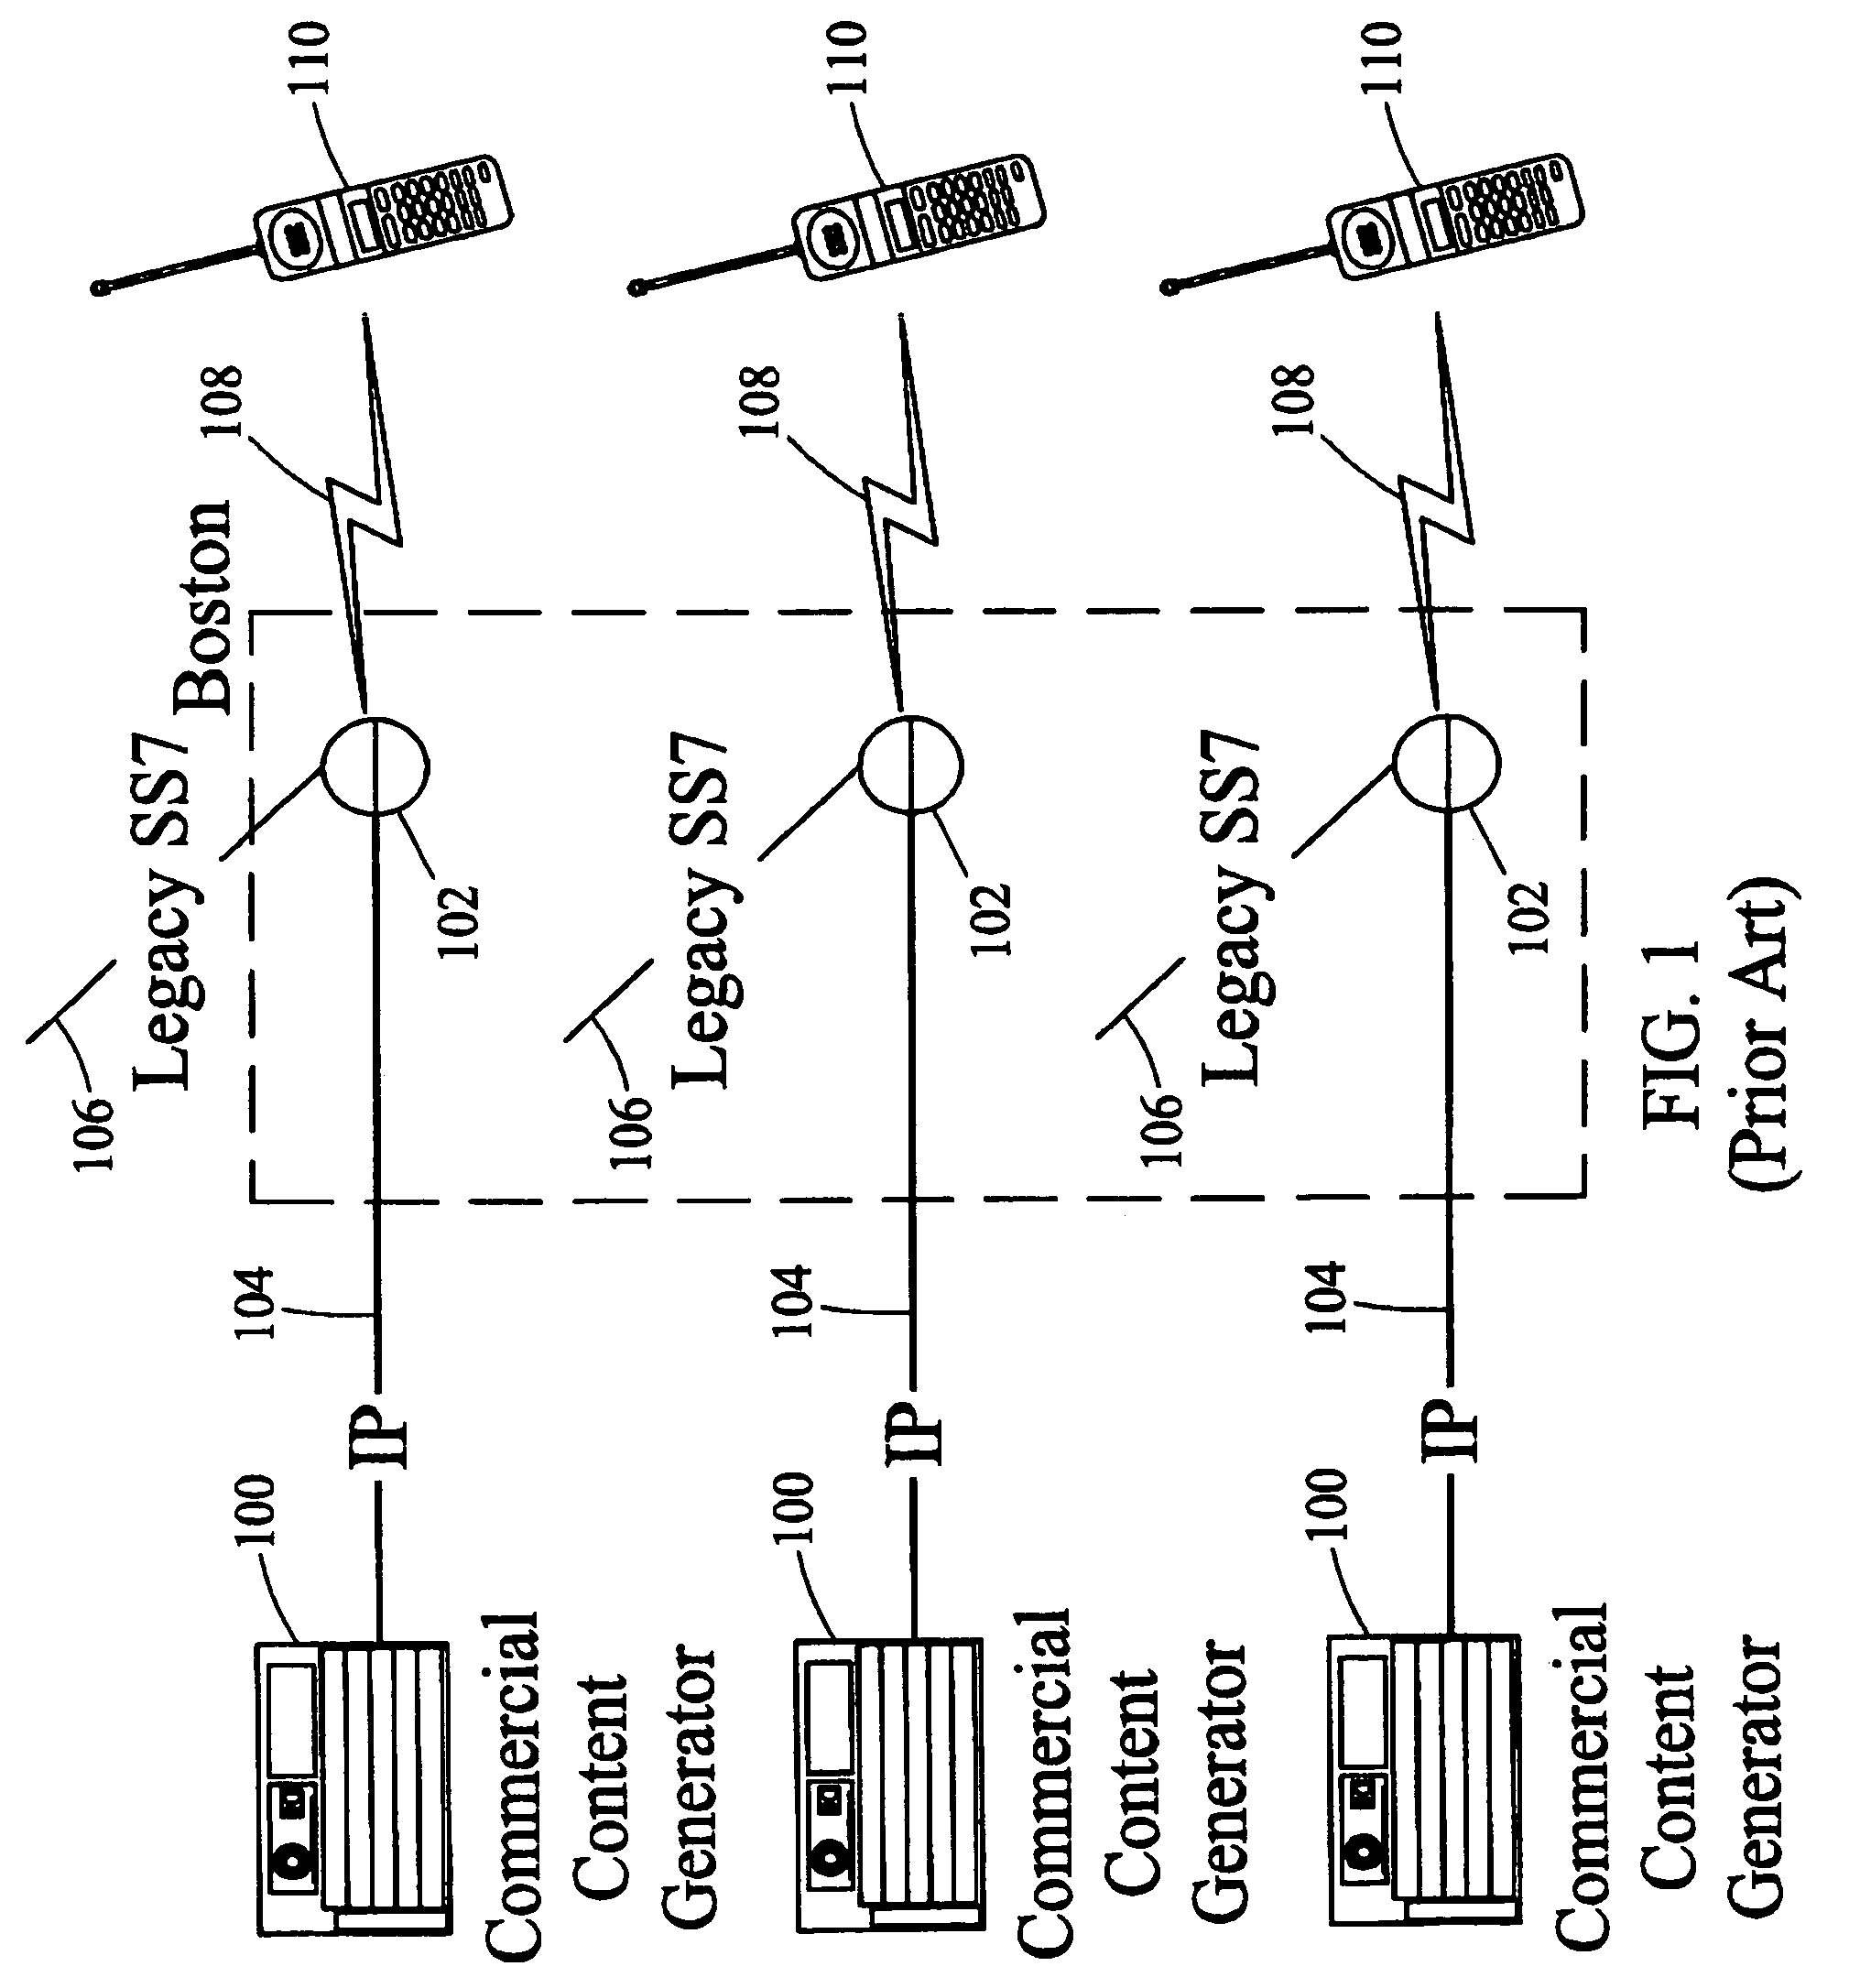 Methods and systems for generating, distributing, and screening commercial content